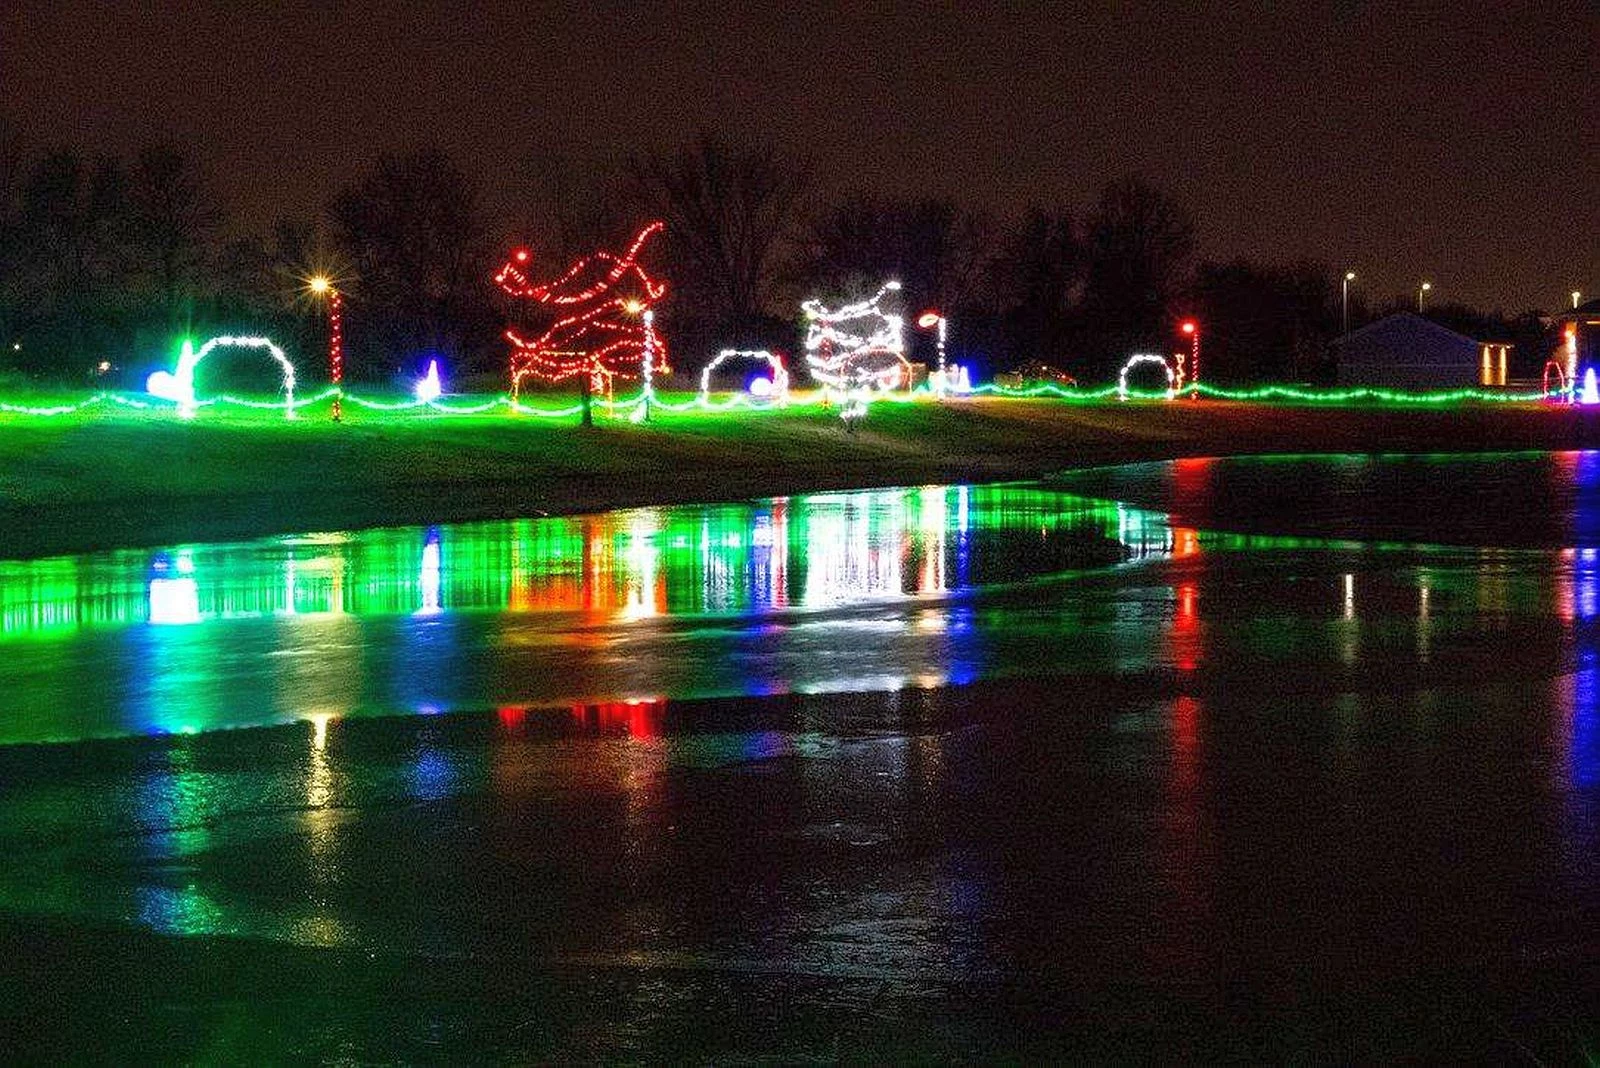 Around The Town Country Lights Festival Prepares For Santa